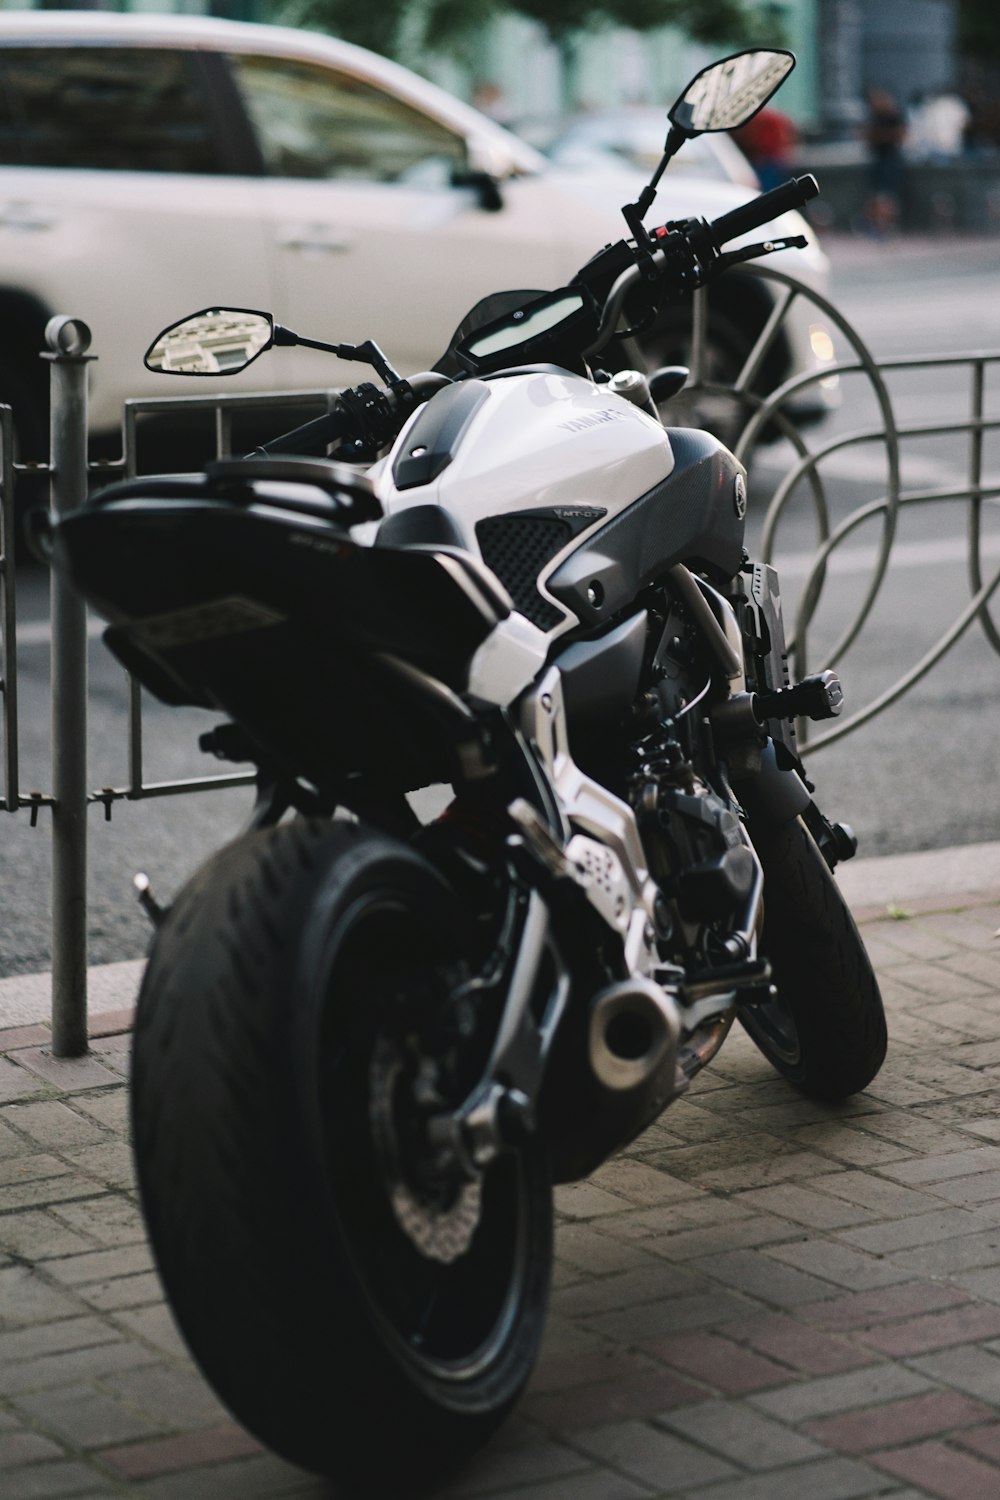 black and silver motorcycle on gray concrete floor